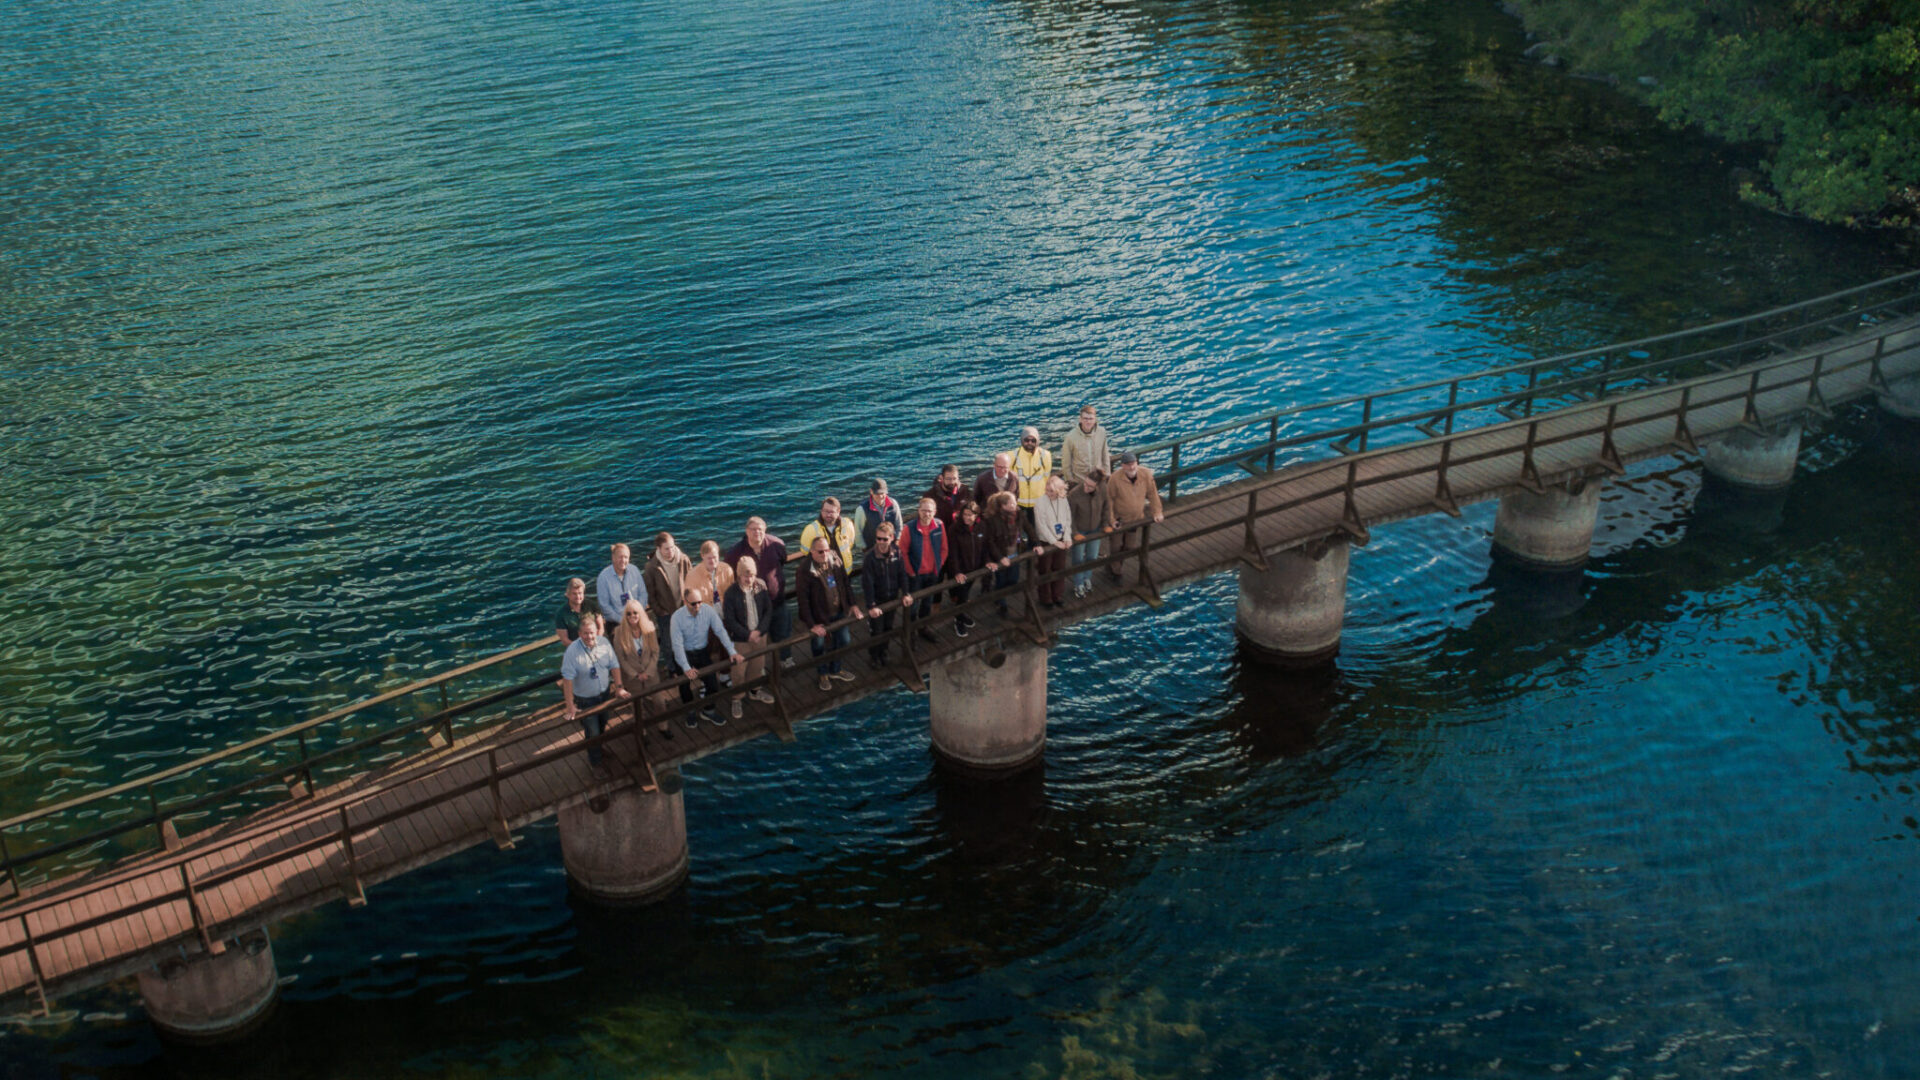 A group of people standing on a bridge in the water.